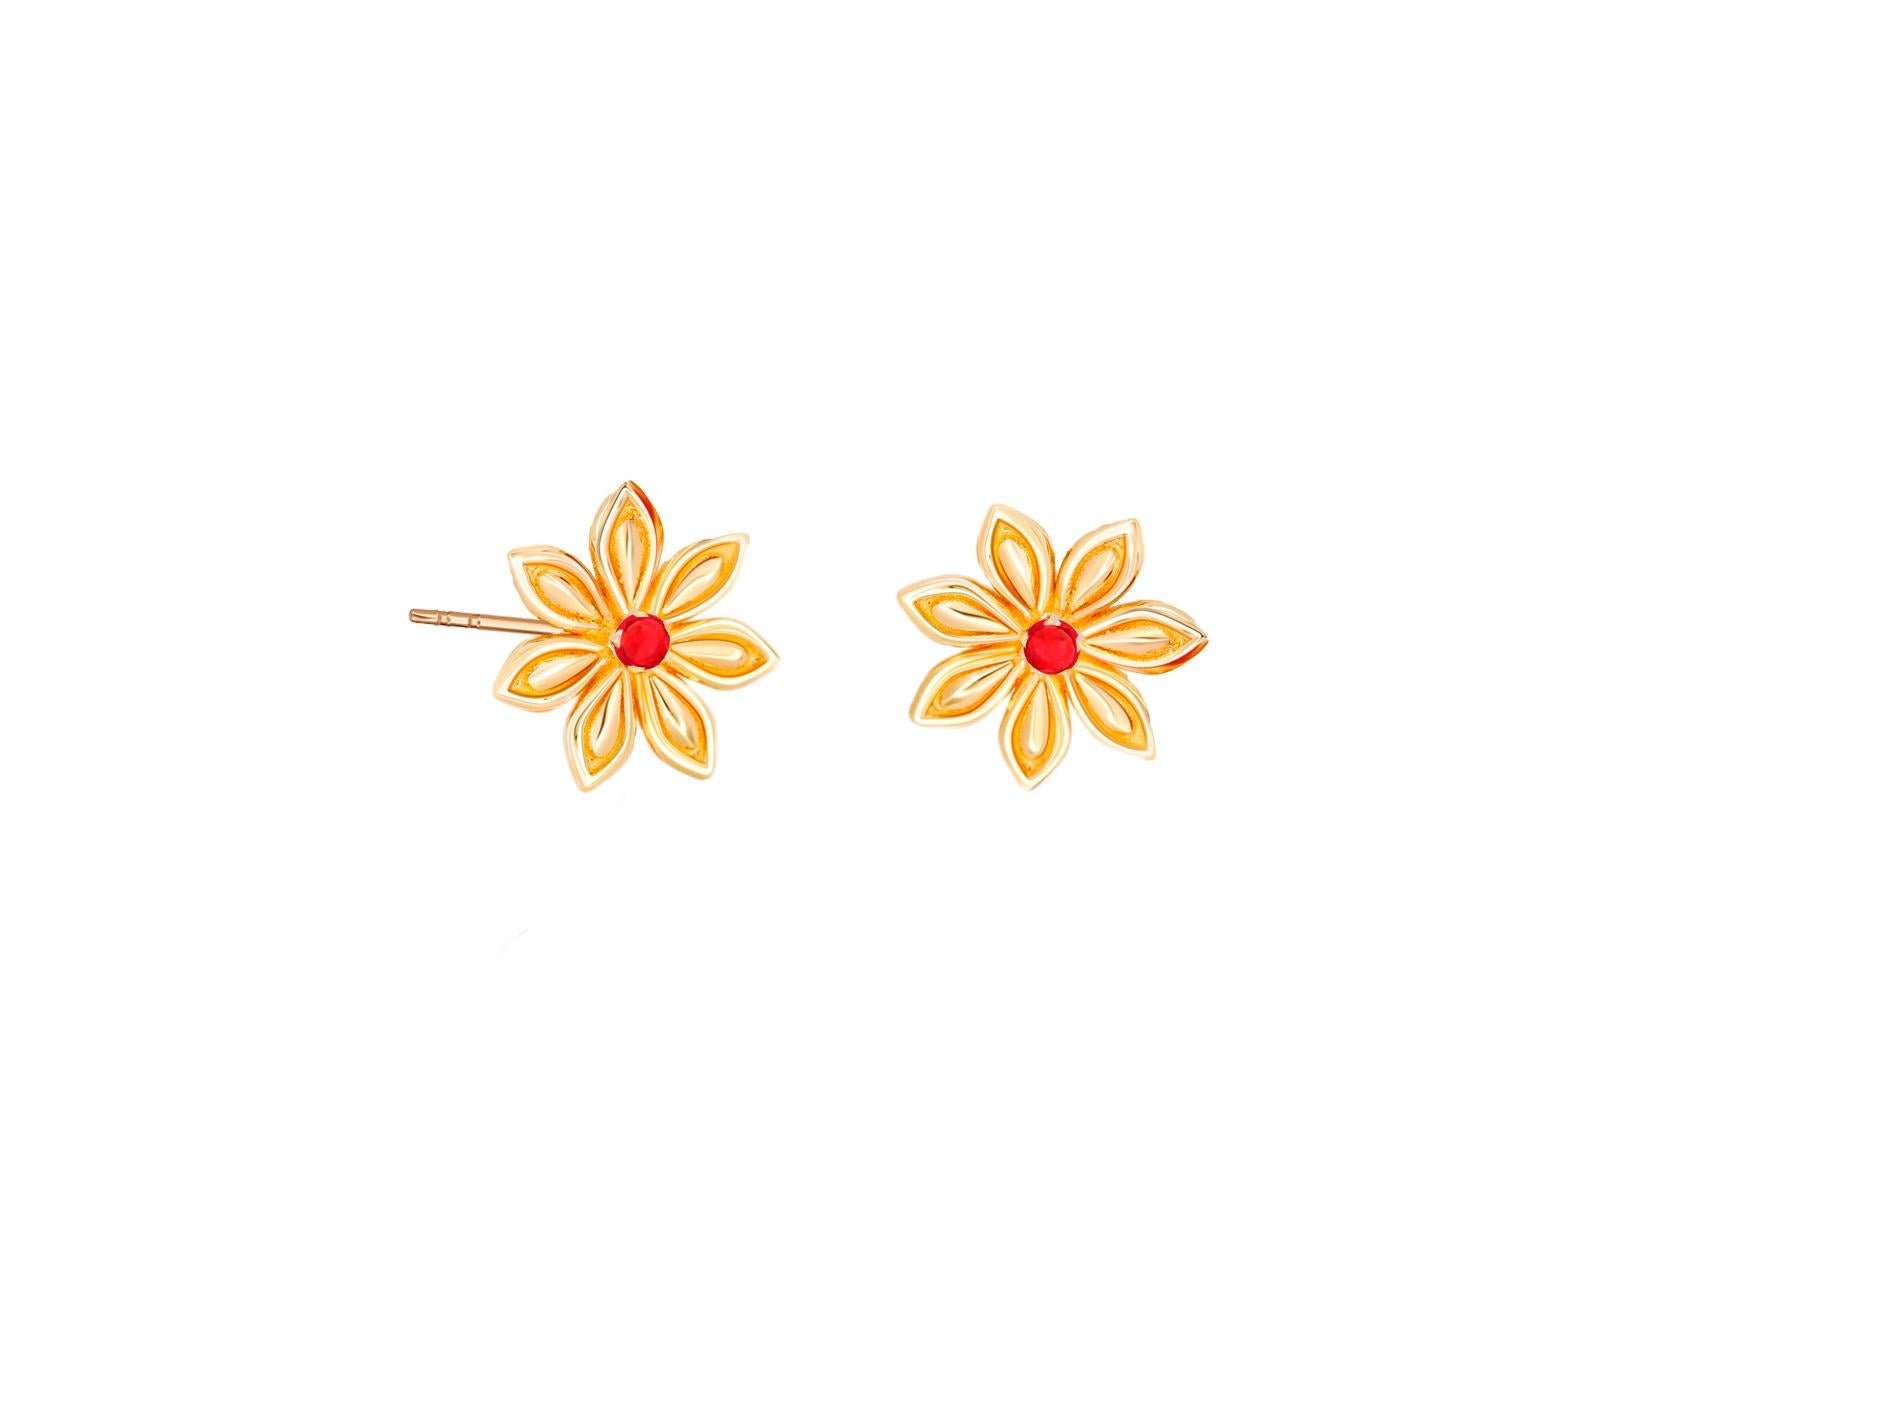 Star Anise Flower 14k gold earrings. Round ruby earrings. Danity gold earrings. Flower earrings studs with rubies in 14k gold.
Metal: 14k gold
Weight: 2 gr
Central stone: Rubies- 2 pieces
Cut: Round
Weight: aprx 0.25 ct. total.
Color: red
Clarity: